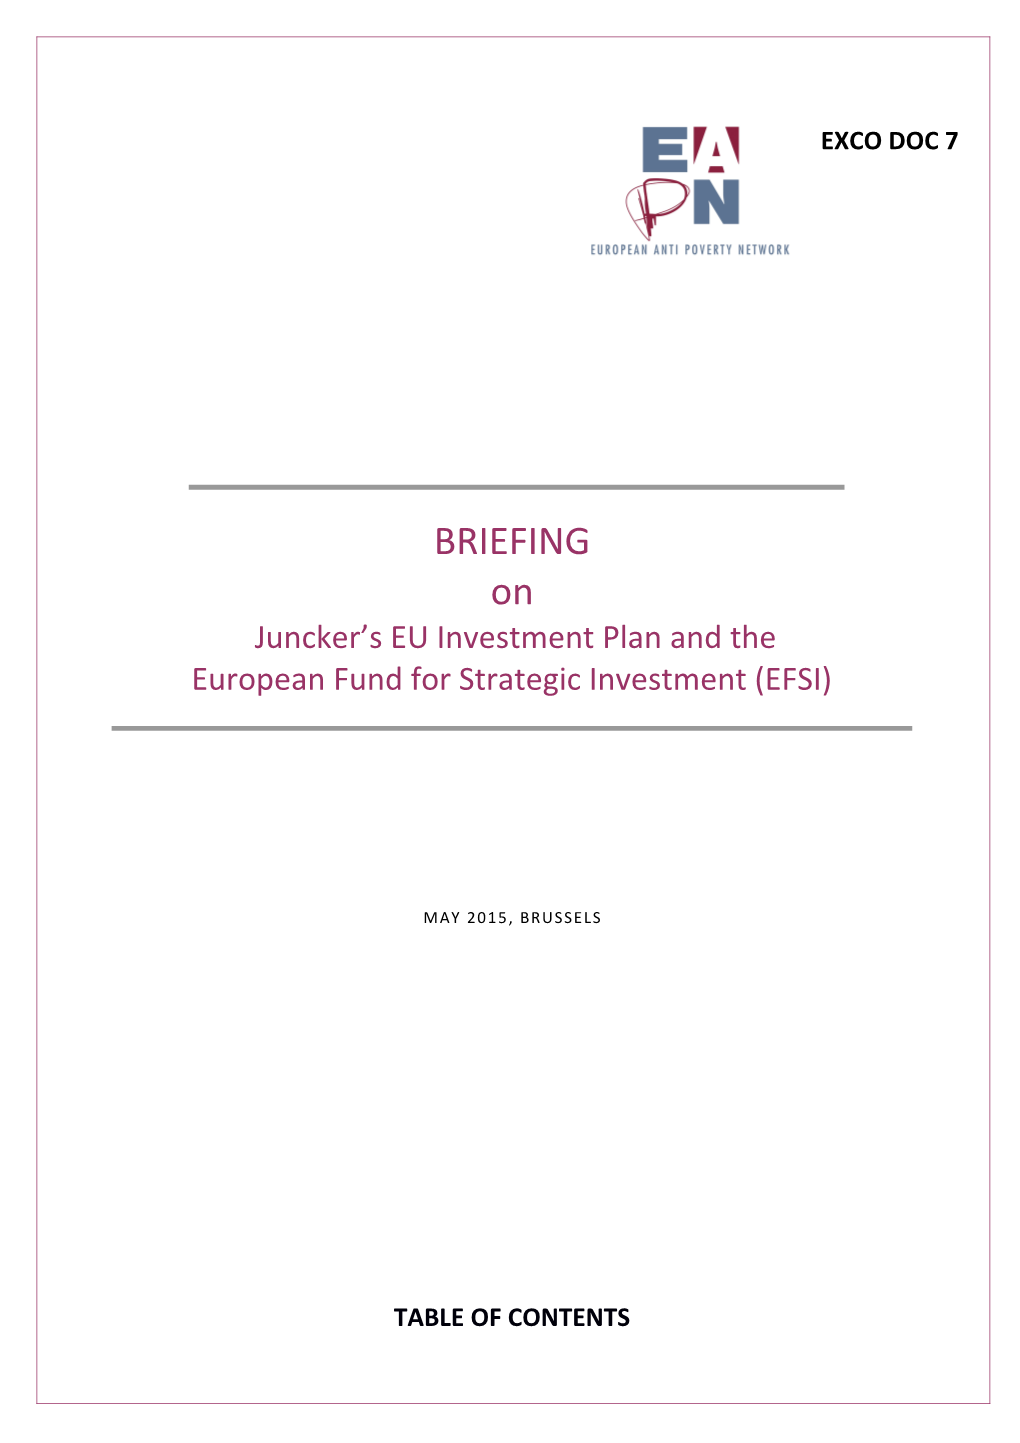 Juncker S EU Investment Plan and The